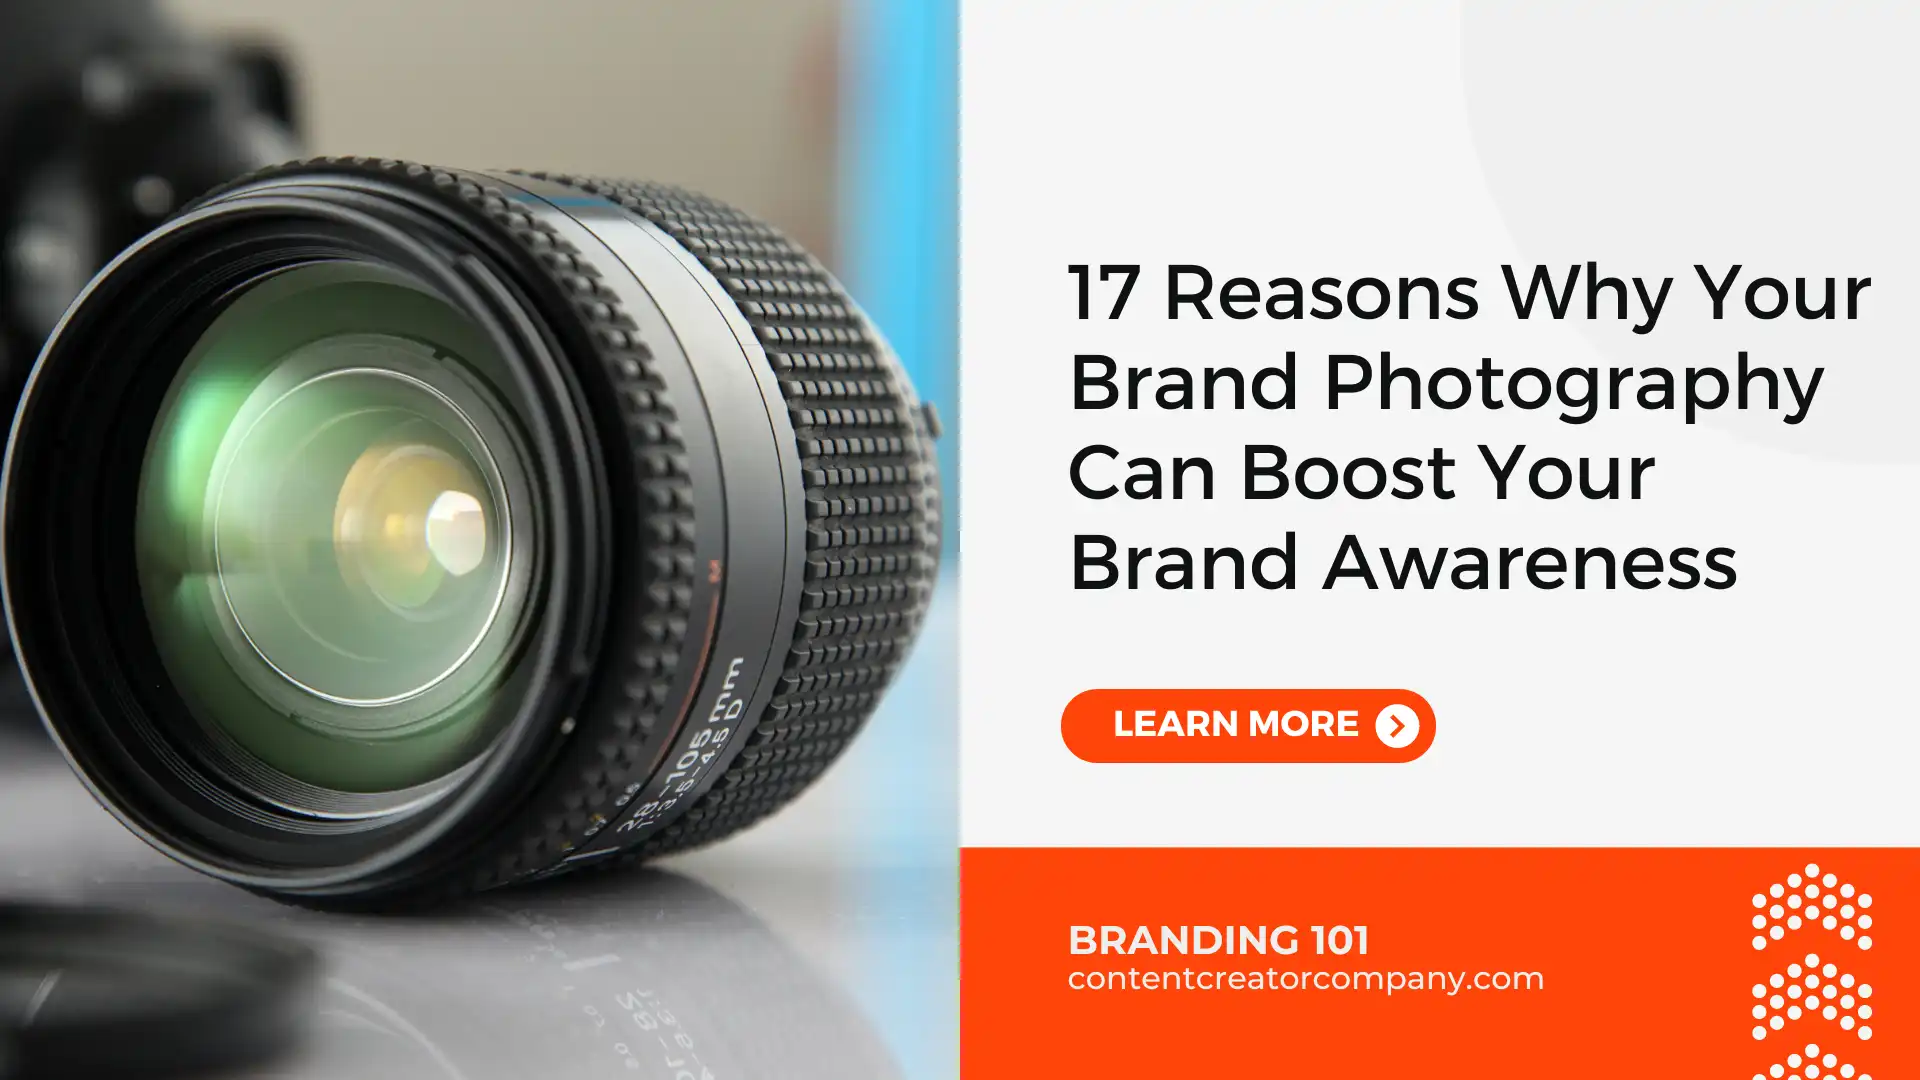 17 Reasons Why Your Brand Photography Can Boost Your Brand Awareness